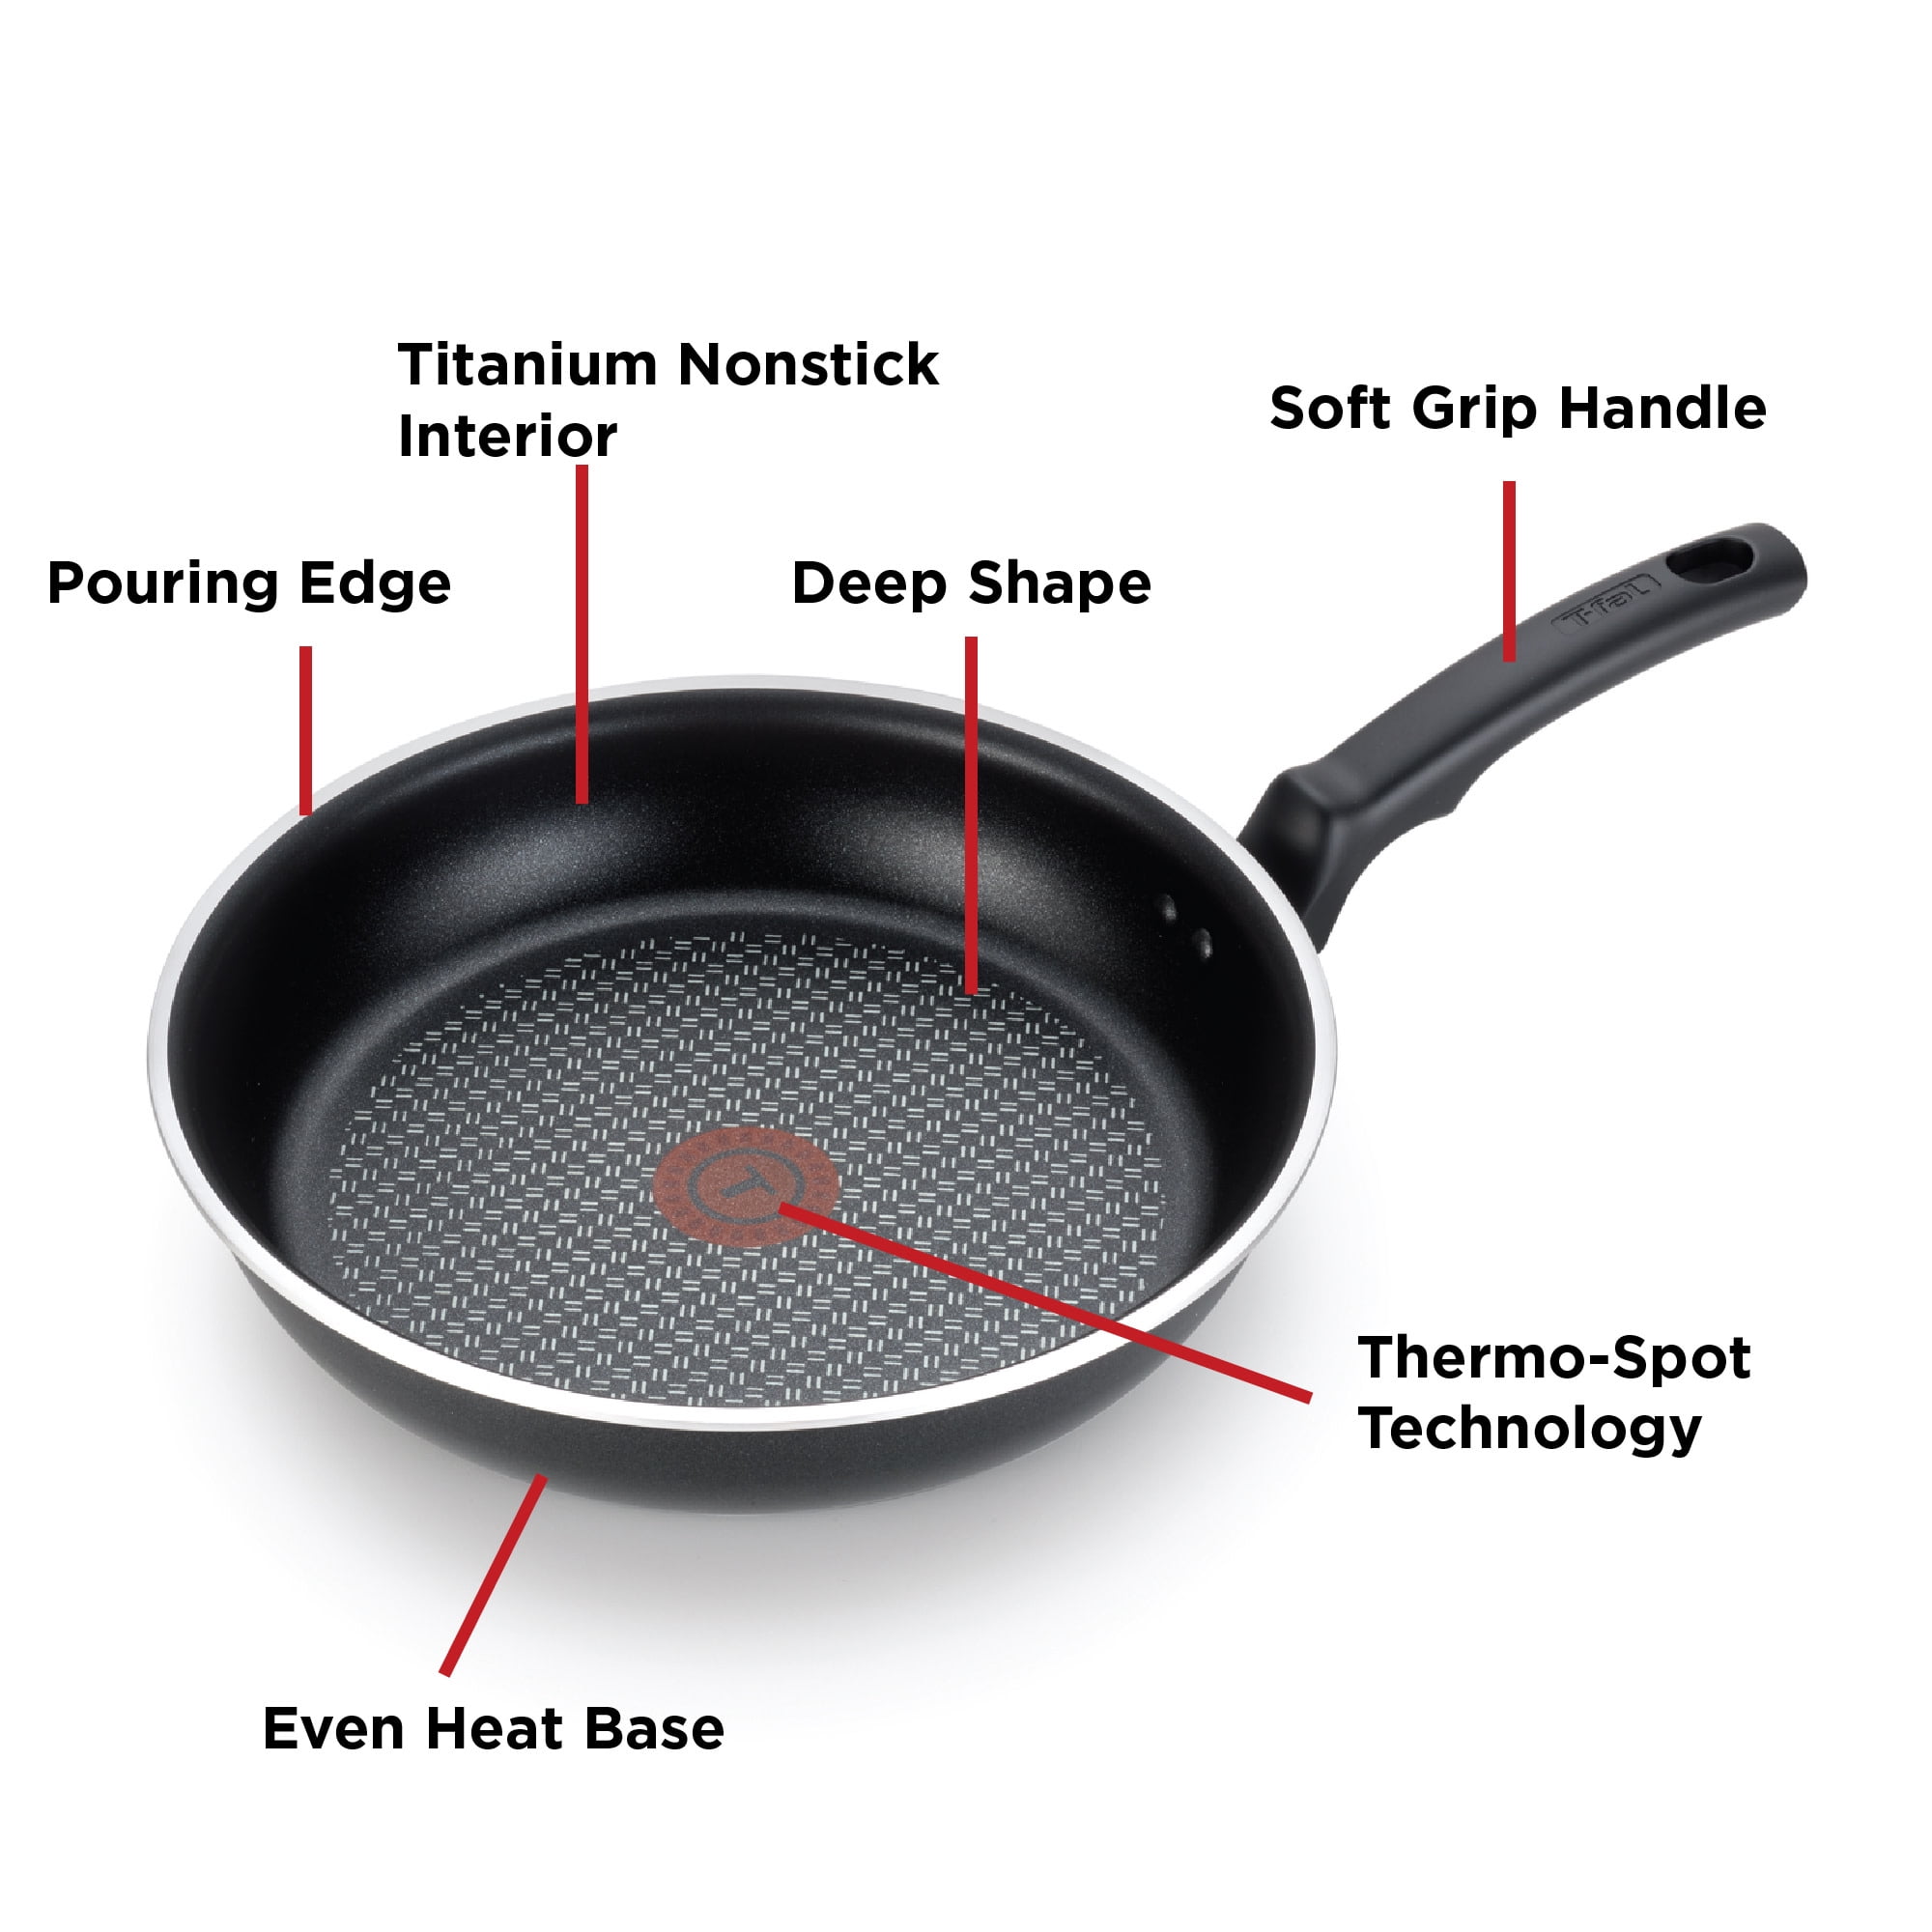 9.5 Inch Classic Non-stick Fry Pan (2 PACK) – Not a Square Pan